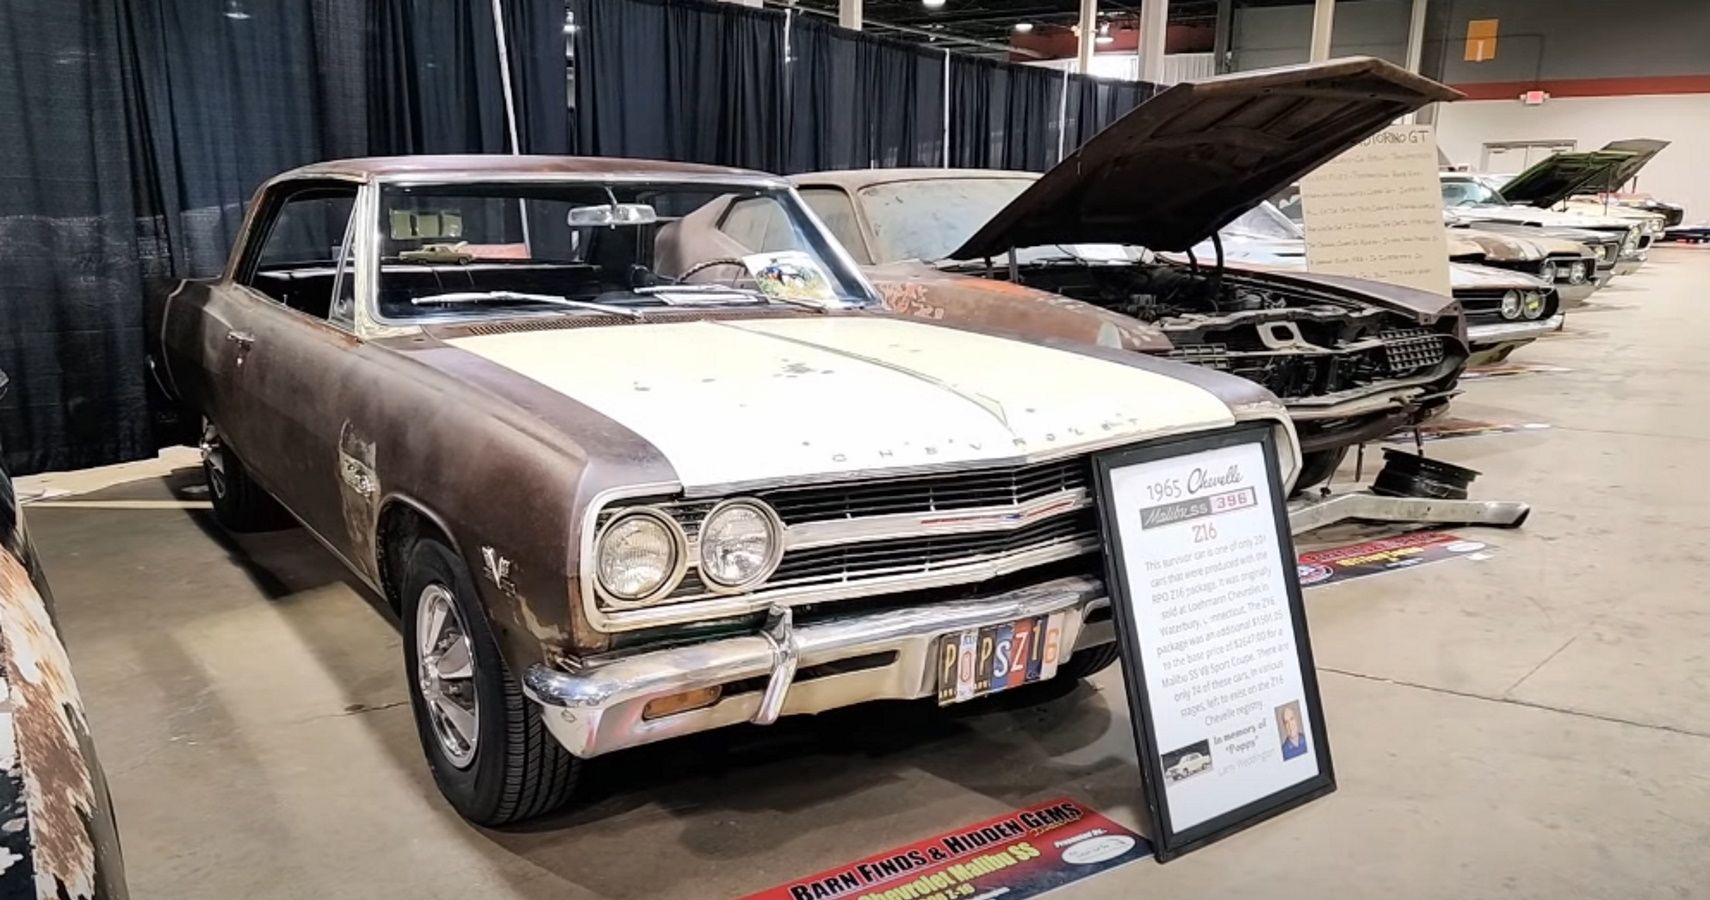 Epic Barn Find Display Showcases Rare Dodges, Chevrolets, And Fords